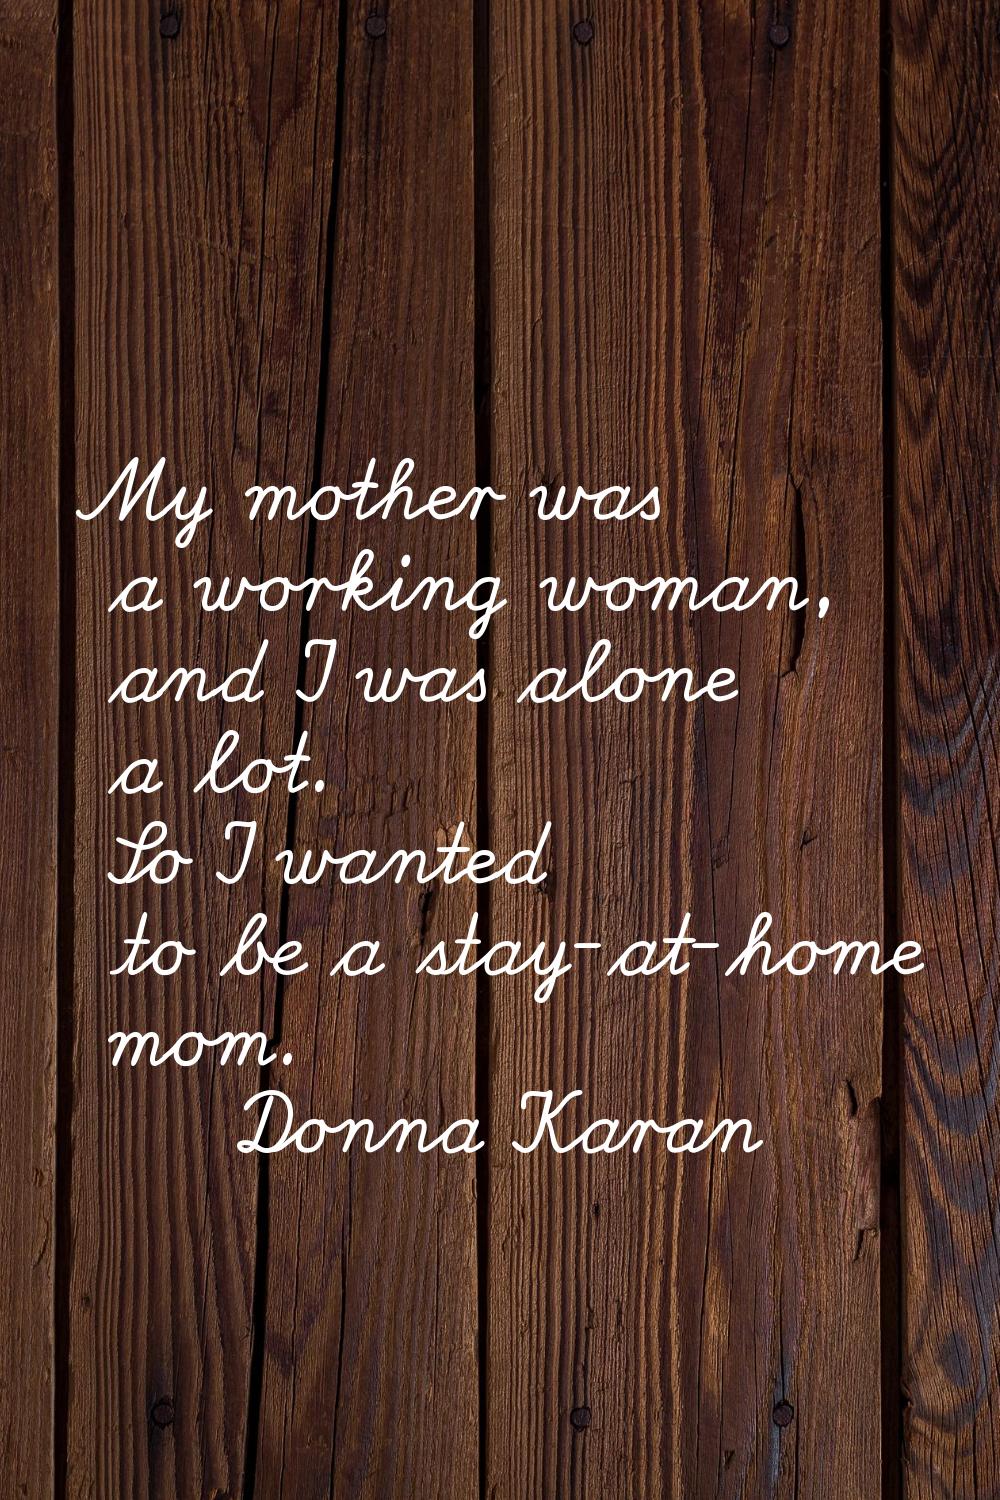 My mother was a working woman, and I was alone a lot. So I wanted to be a stay-at-home mom.